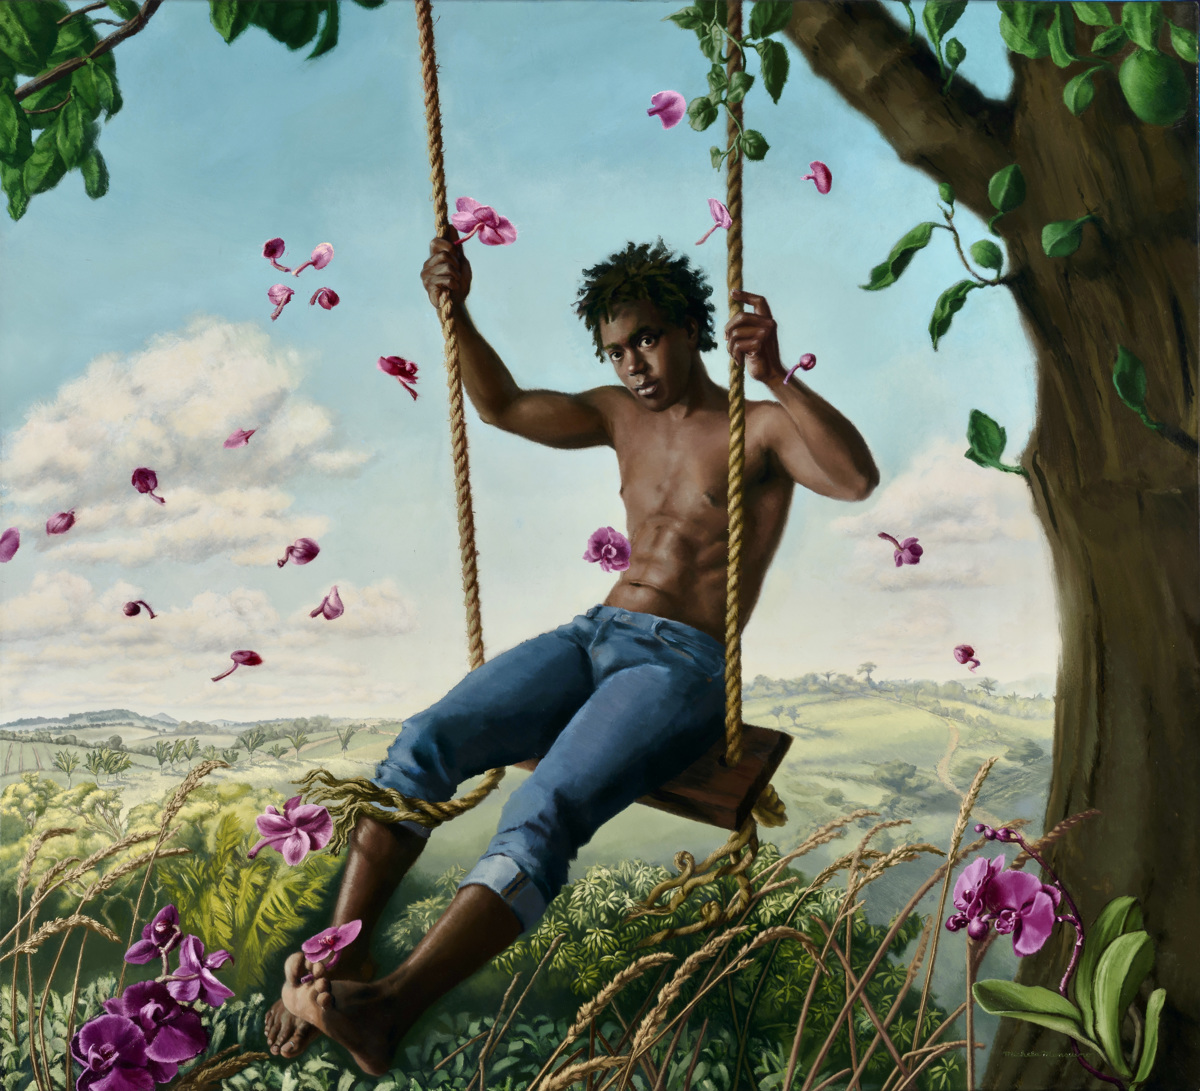 African American Man on a tree swing with flowers